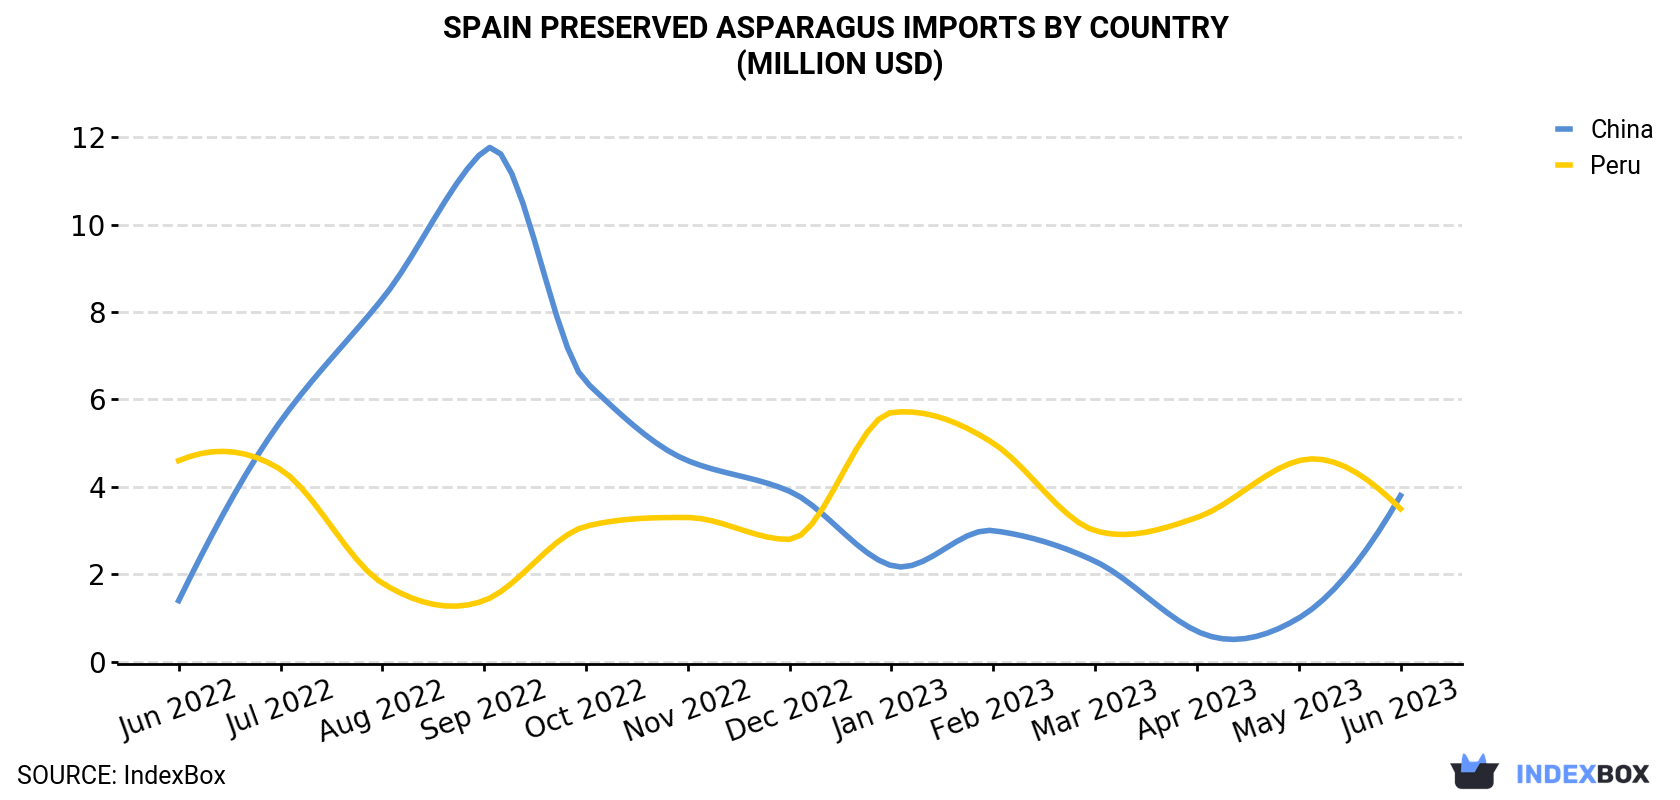 Spain Preserved Asparagus Imports By Country (Million USD)